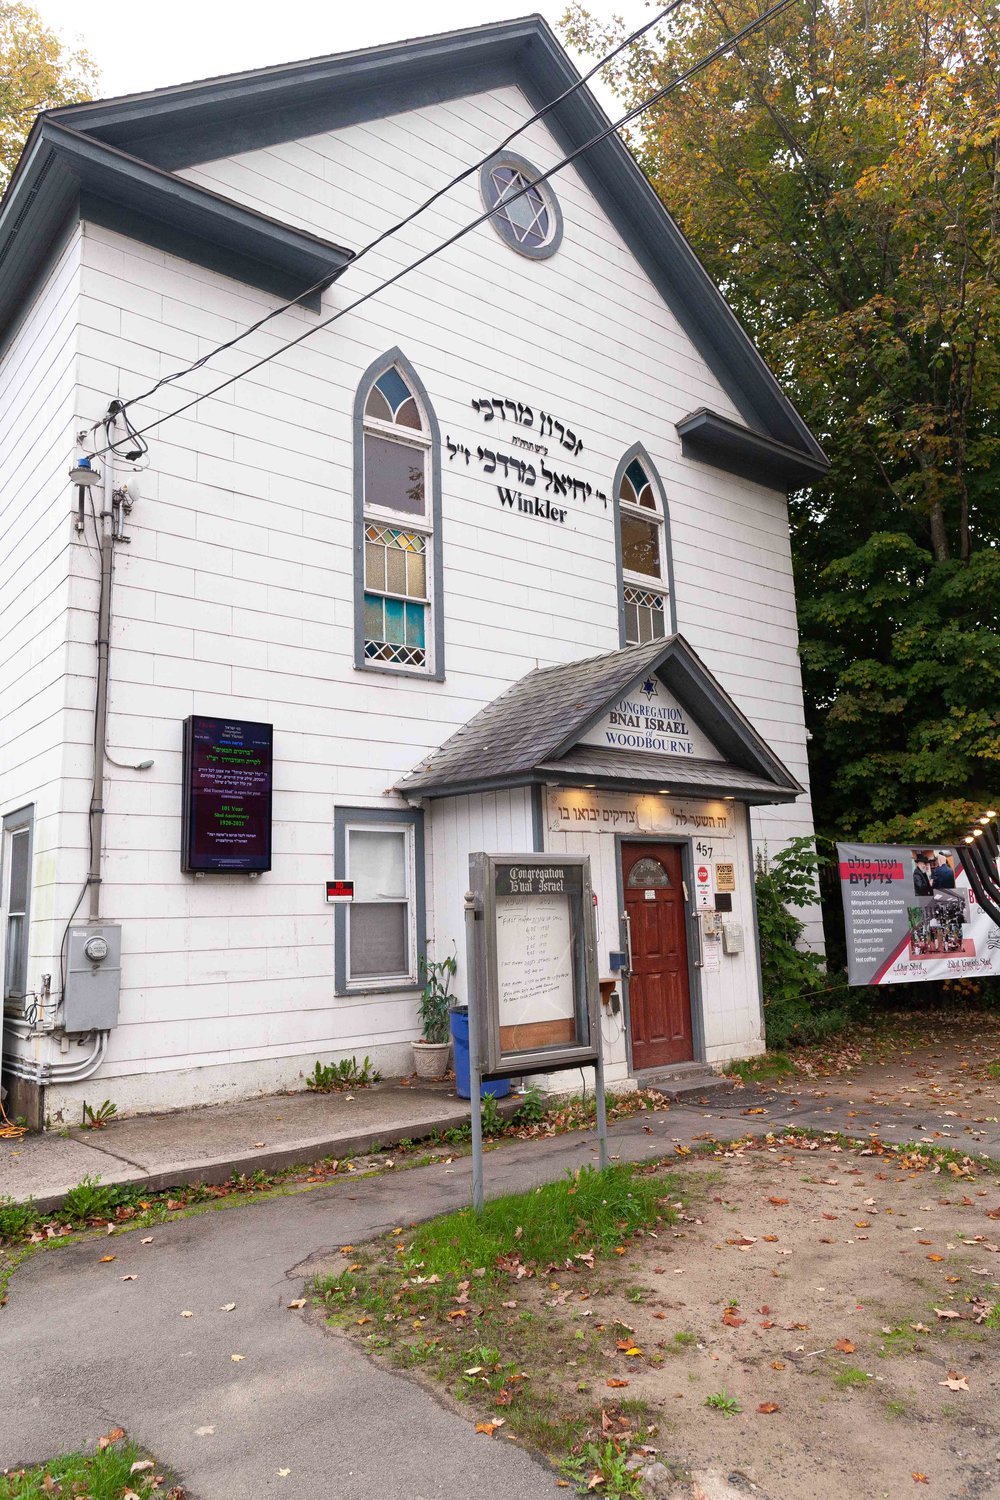 An arrest has been made in connection with a paintball incident that happened at the Woodbourne Shul on State Route 52.